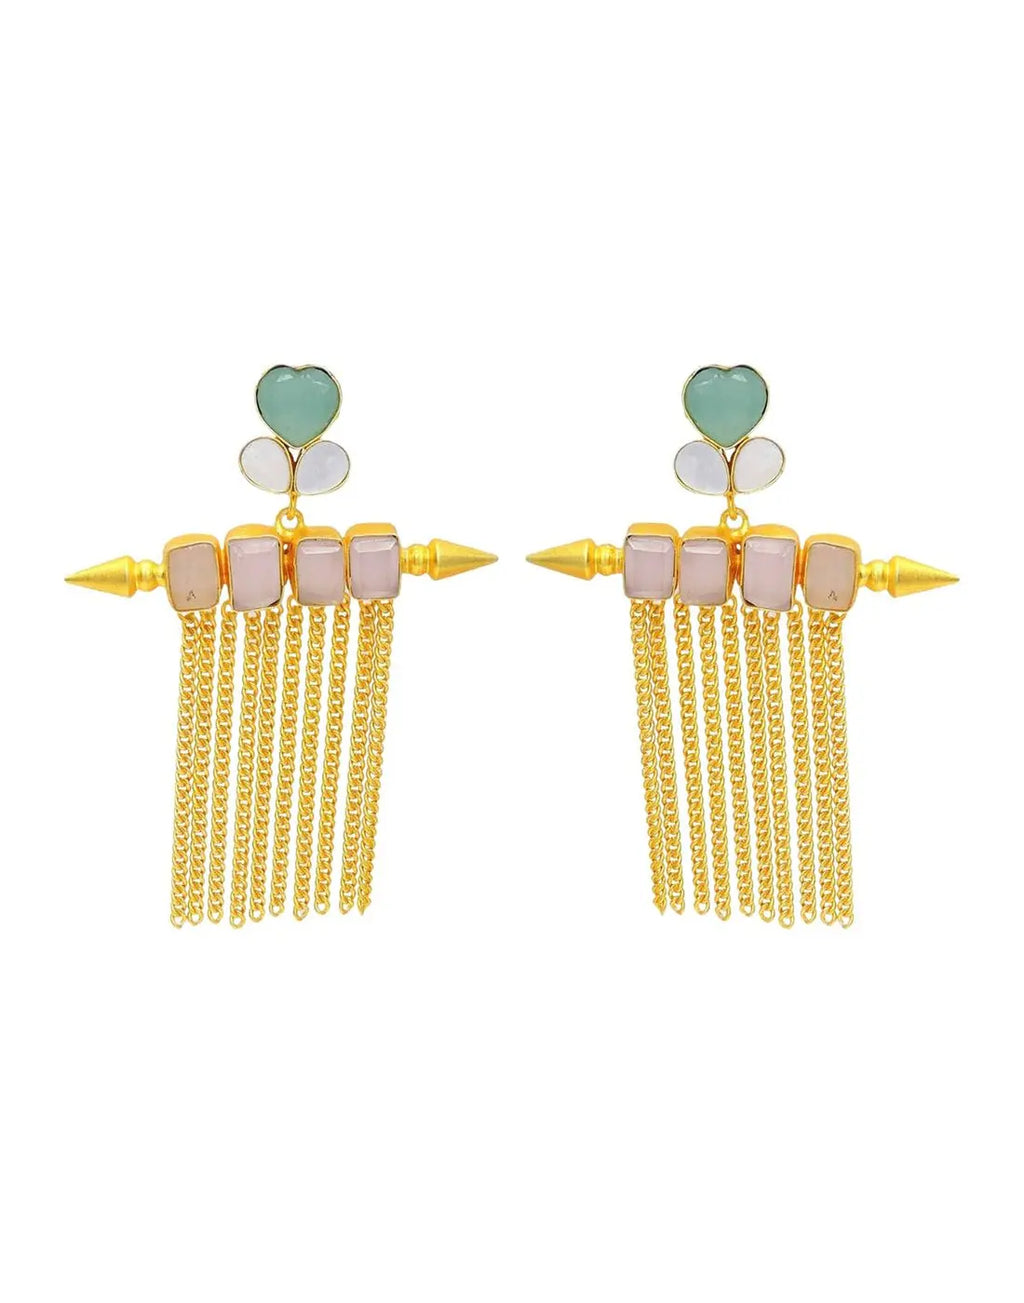 Roza Earrings- Handcrafted Jewellery from Dori